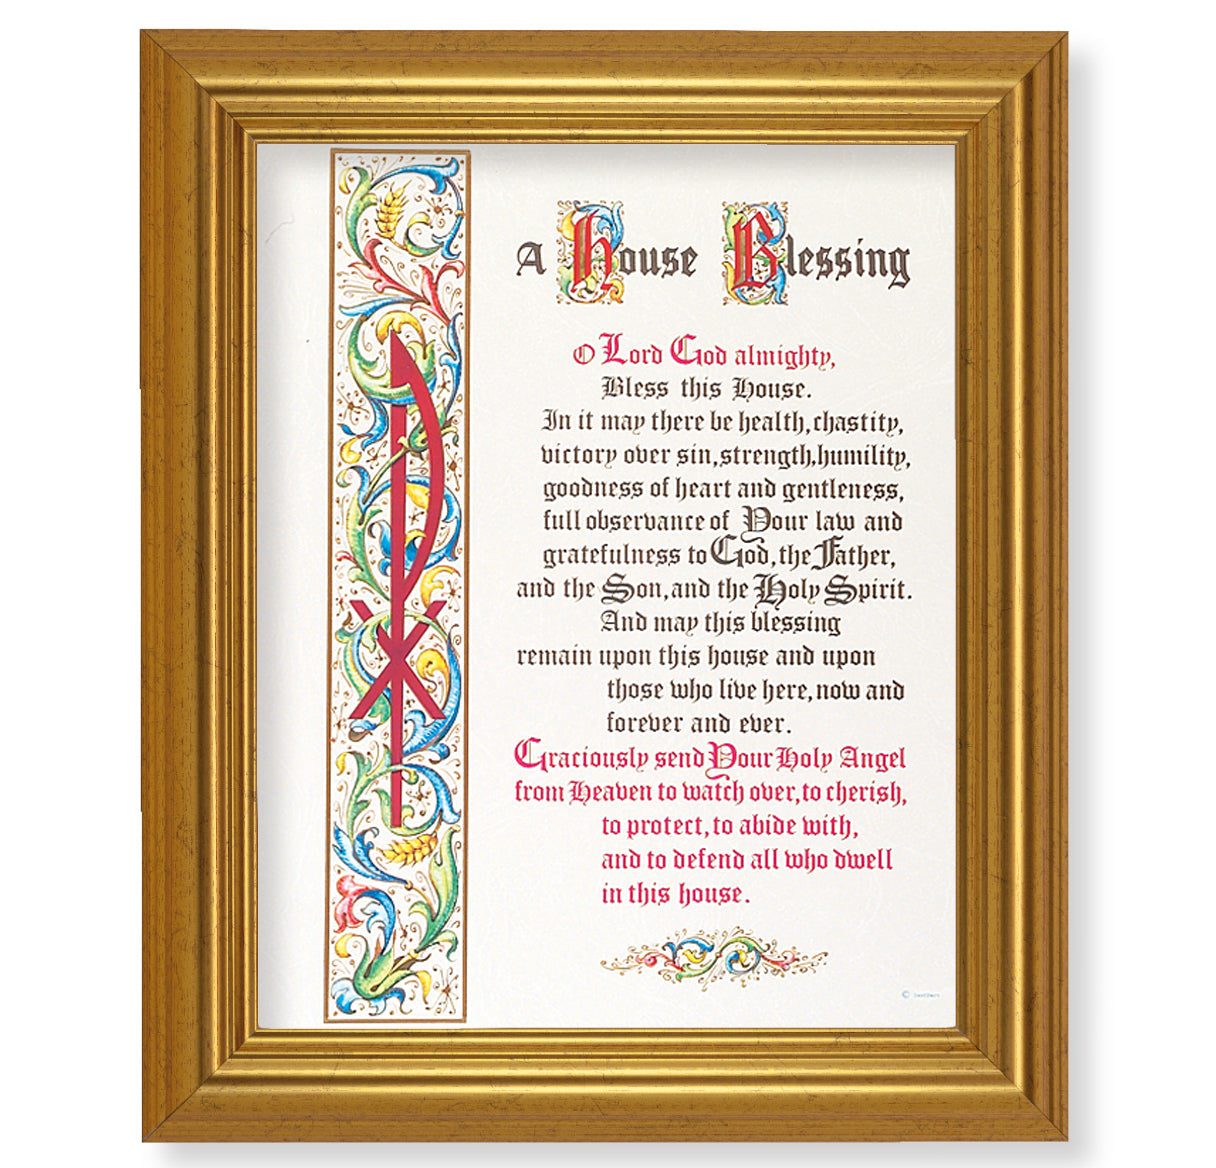 House Blessing Picture Framed Wall Art Decor, Large, Antique Gold-Leaf Classic Frame